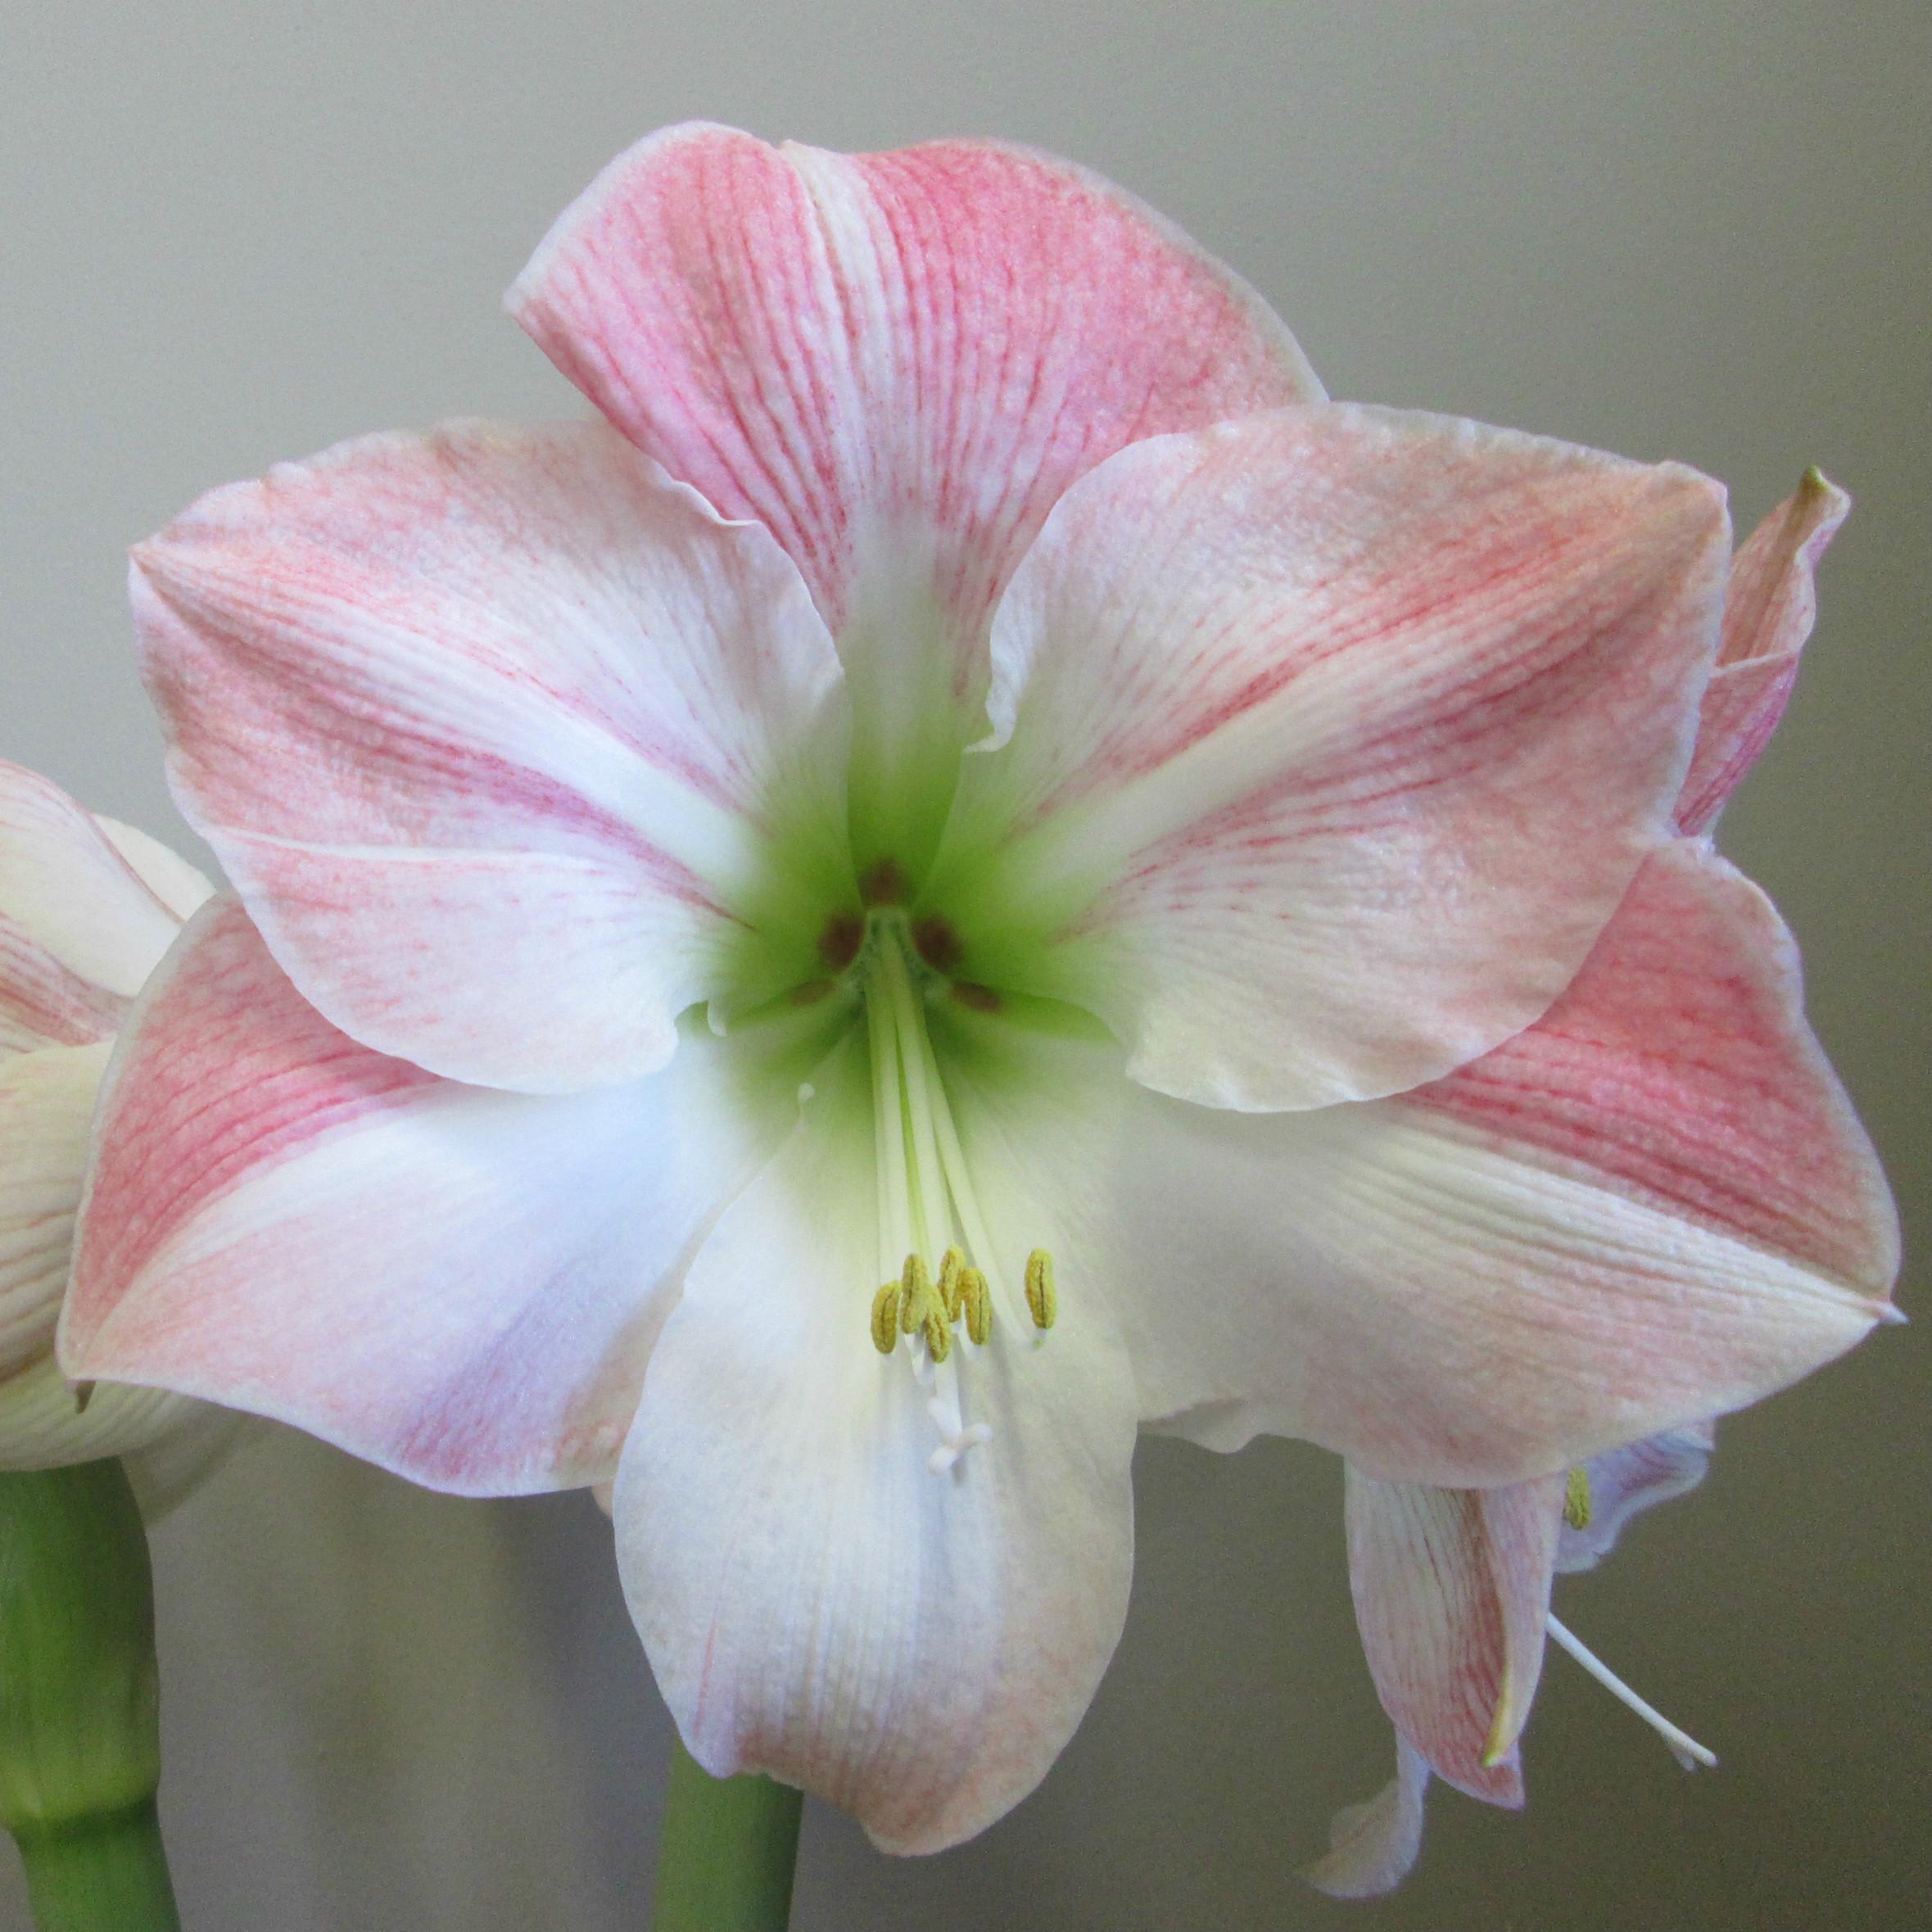 Hippeastrum Southern Hemisphere 'Cherry Blossom' - Christmas Forcing Amaryllis from Leo Berbee Bulb Company